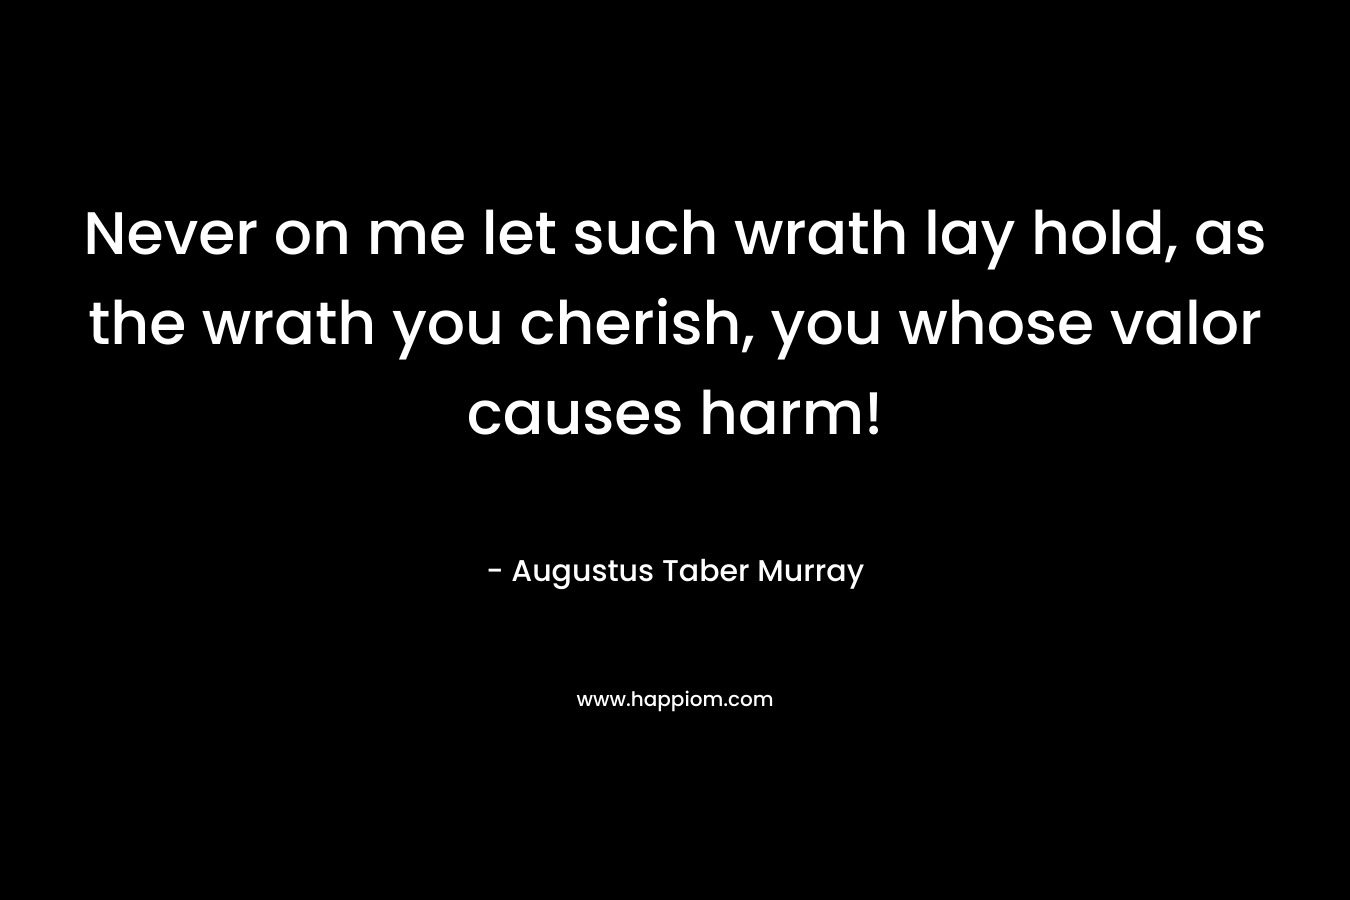 Never on me let such wrath lay hold, as the wrath you cherish, you whose valor causes harm! – Augustus Taber Murray